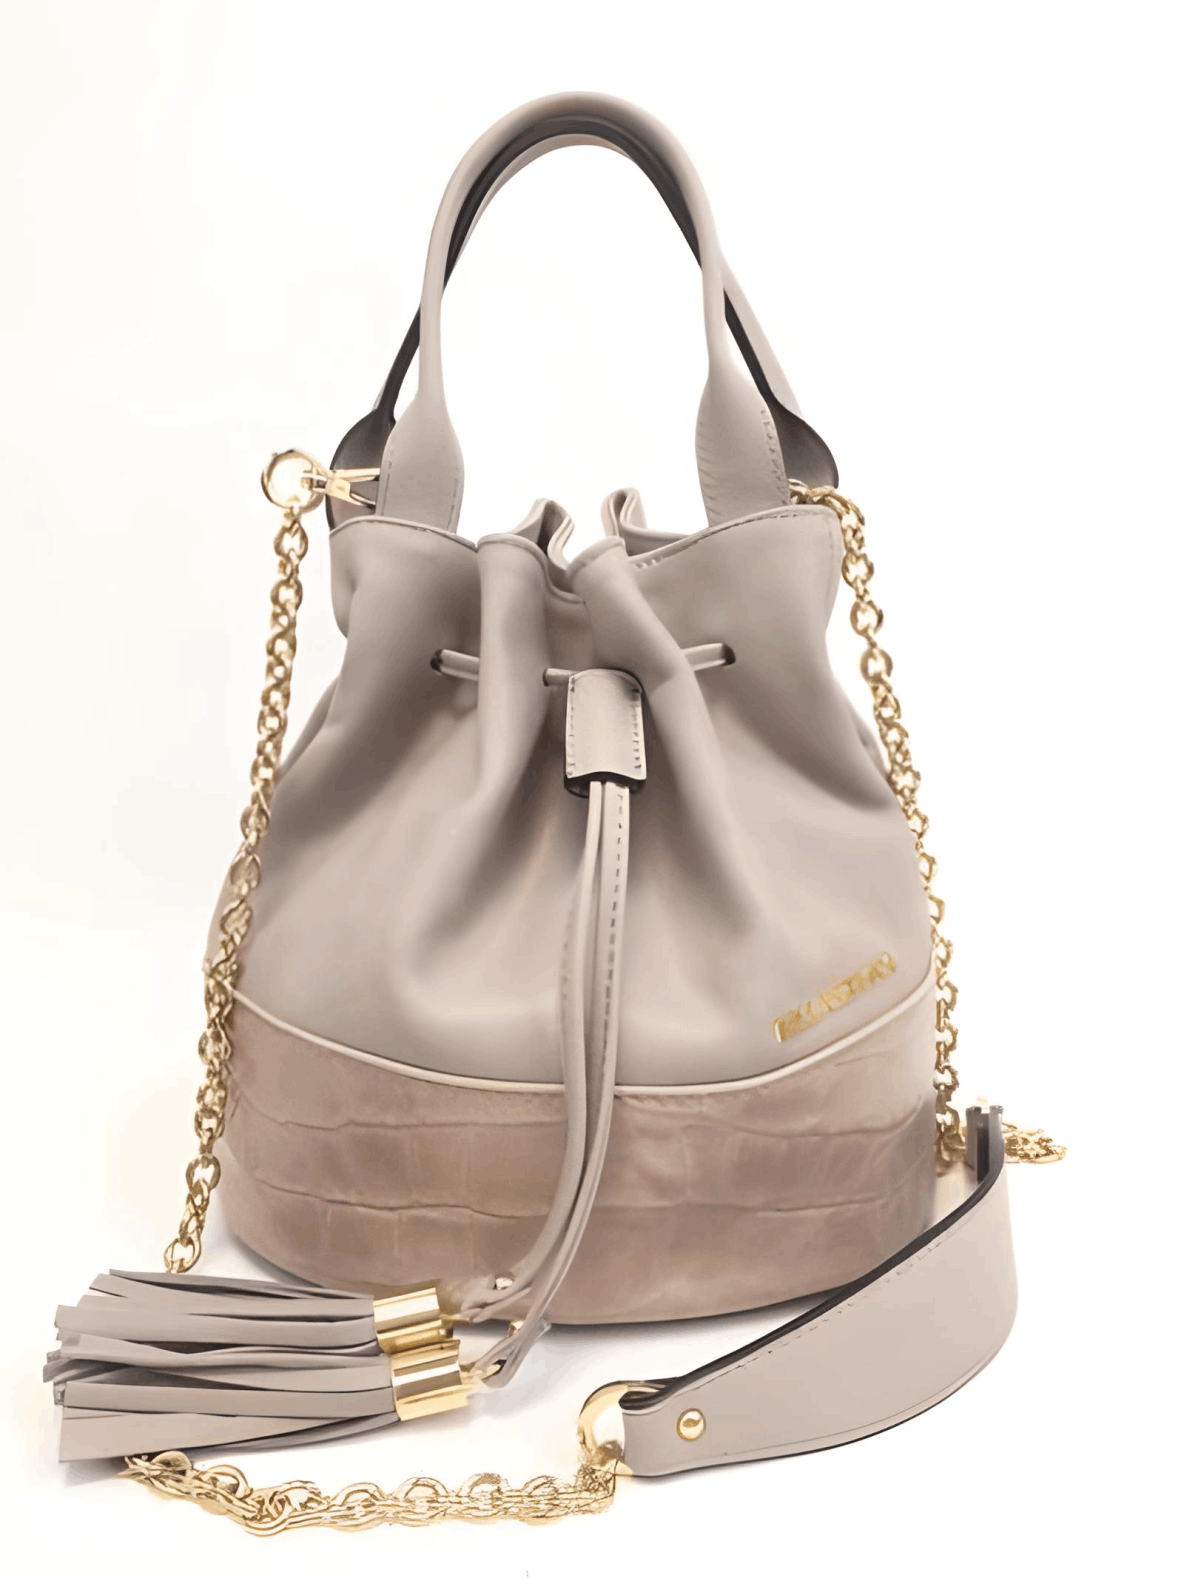 Luxury made in Italy leather handbags, wholesale and private label